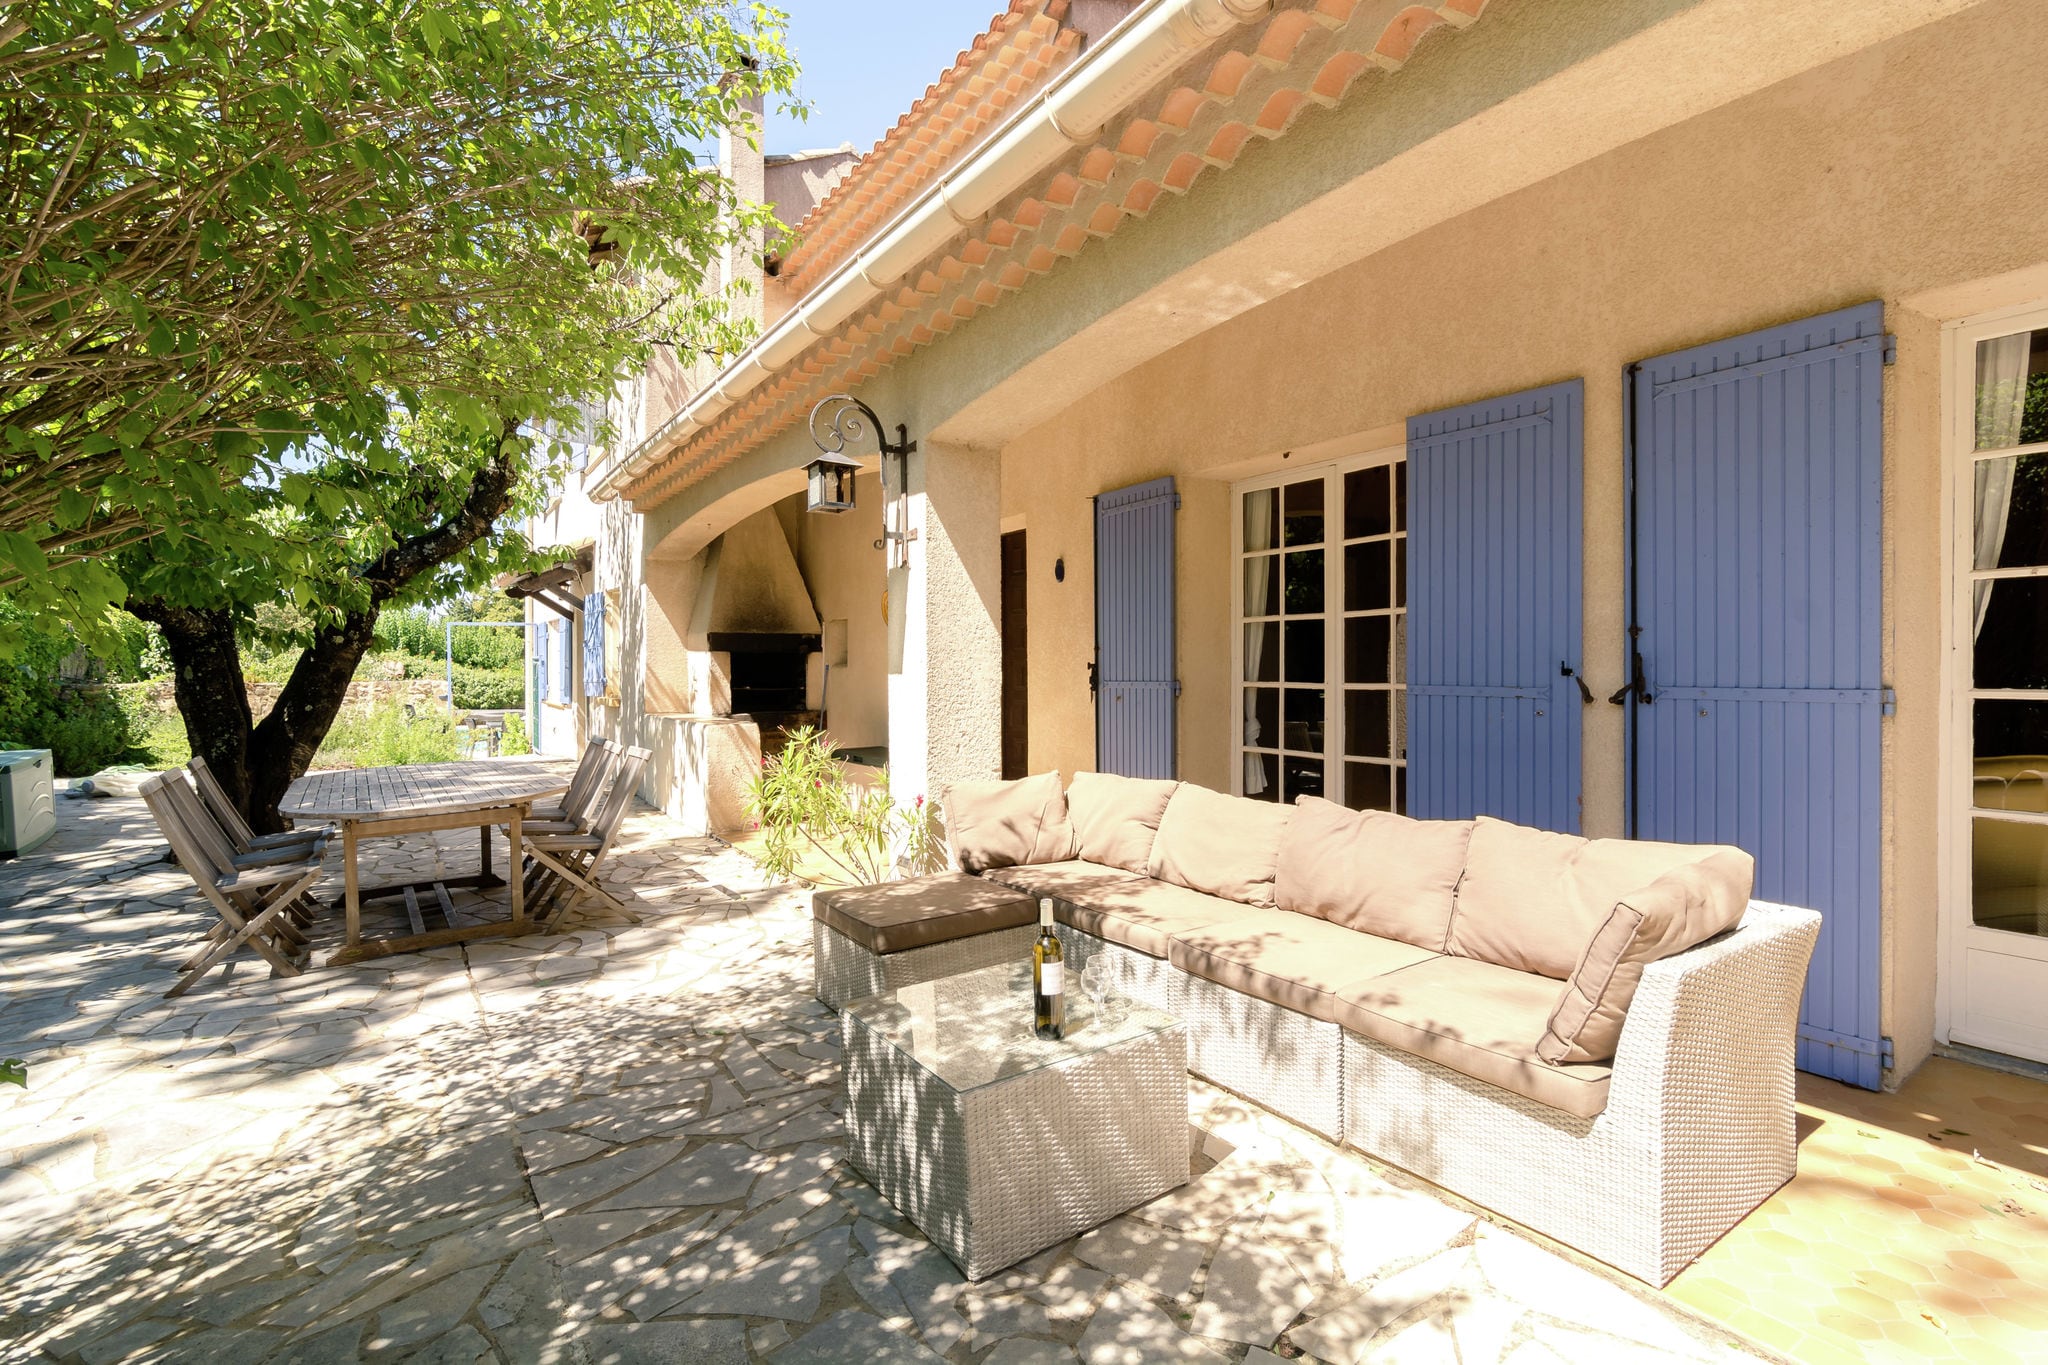 Child-friendly, detached villa with private swimming pool